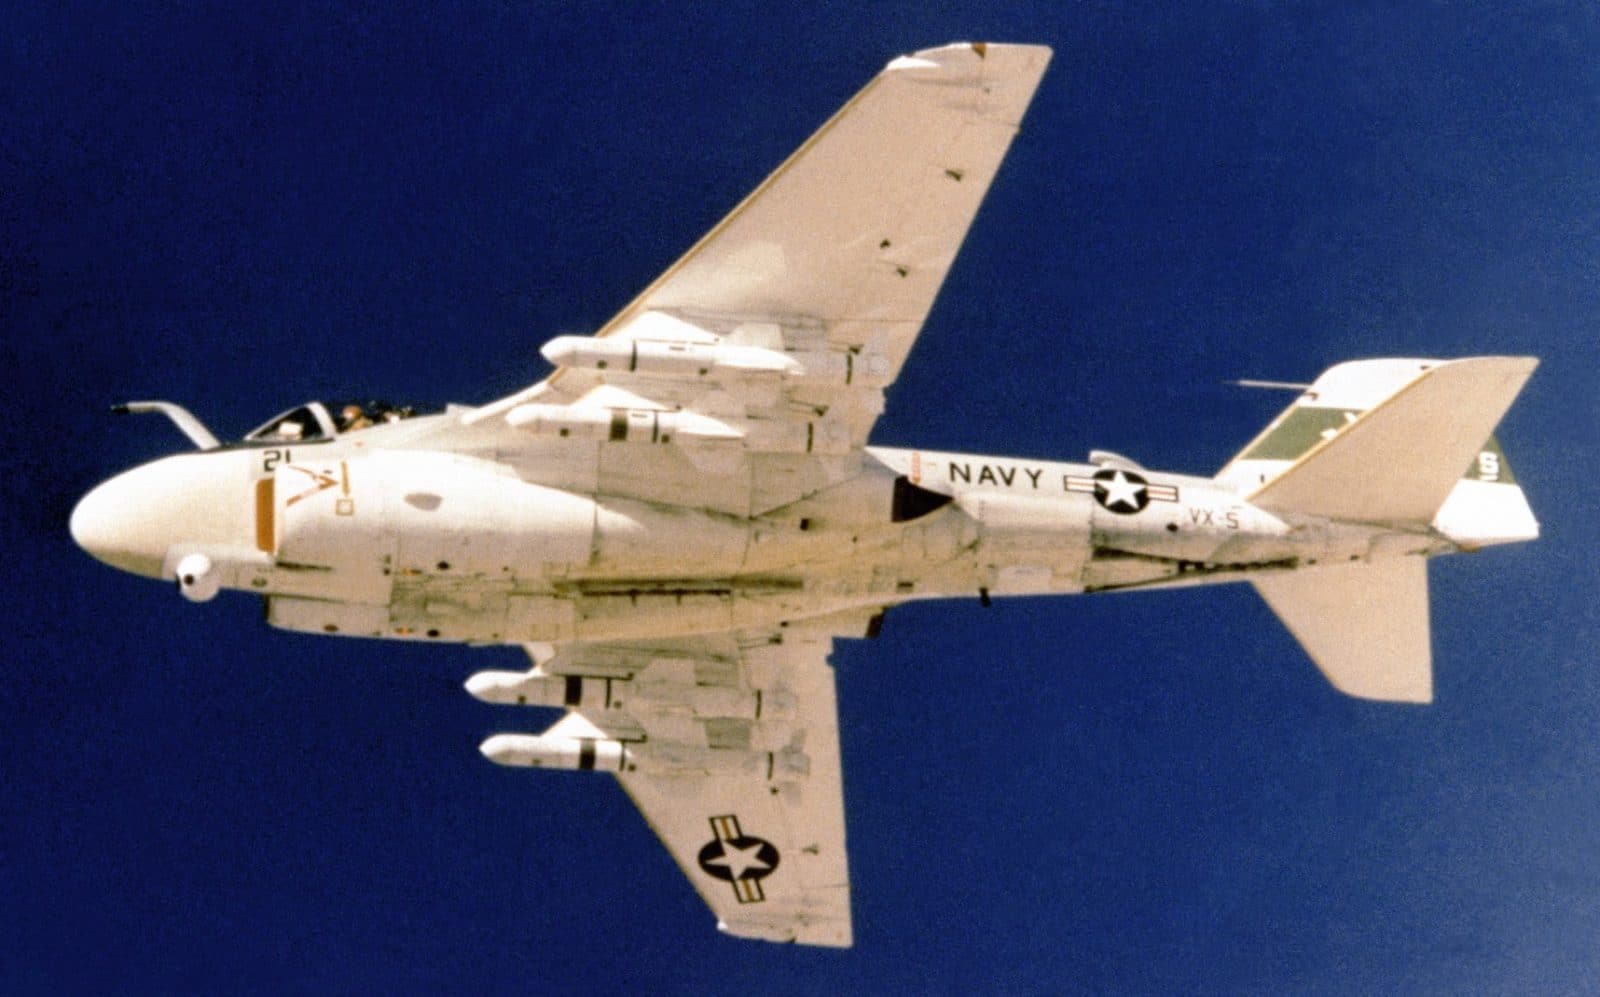 must-watch-this-great-film-about-the-capabilities-of-the-a-6e-intruder